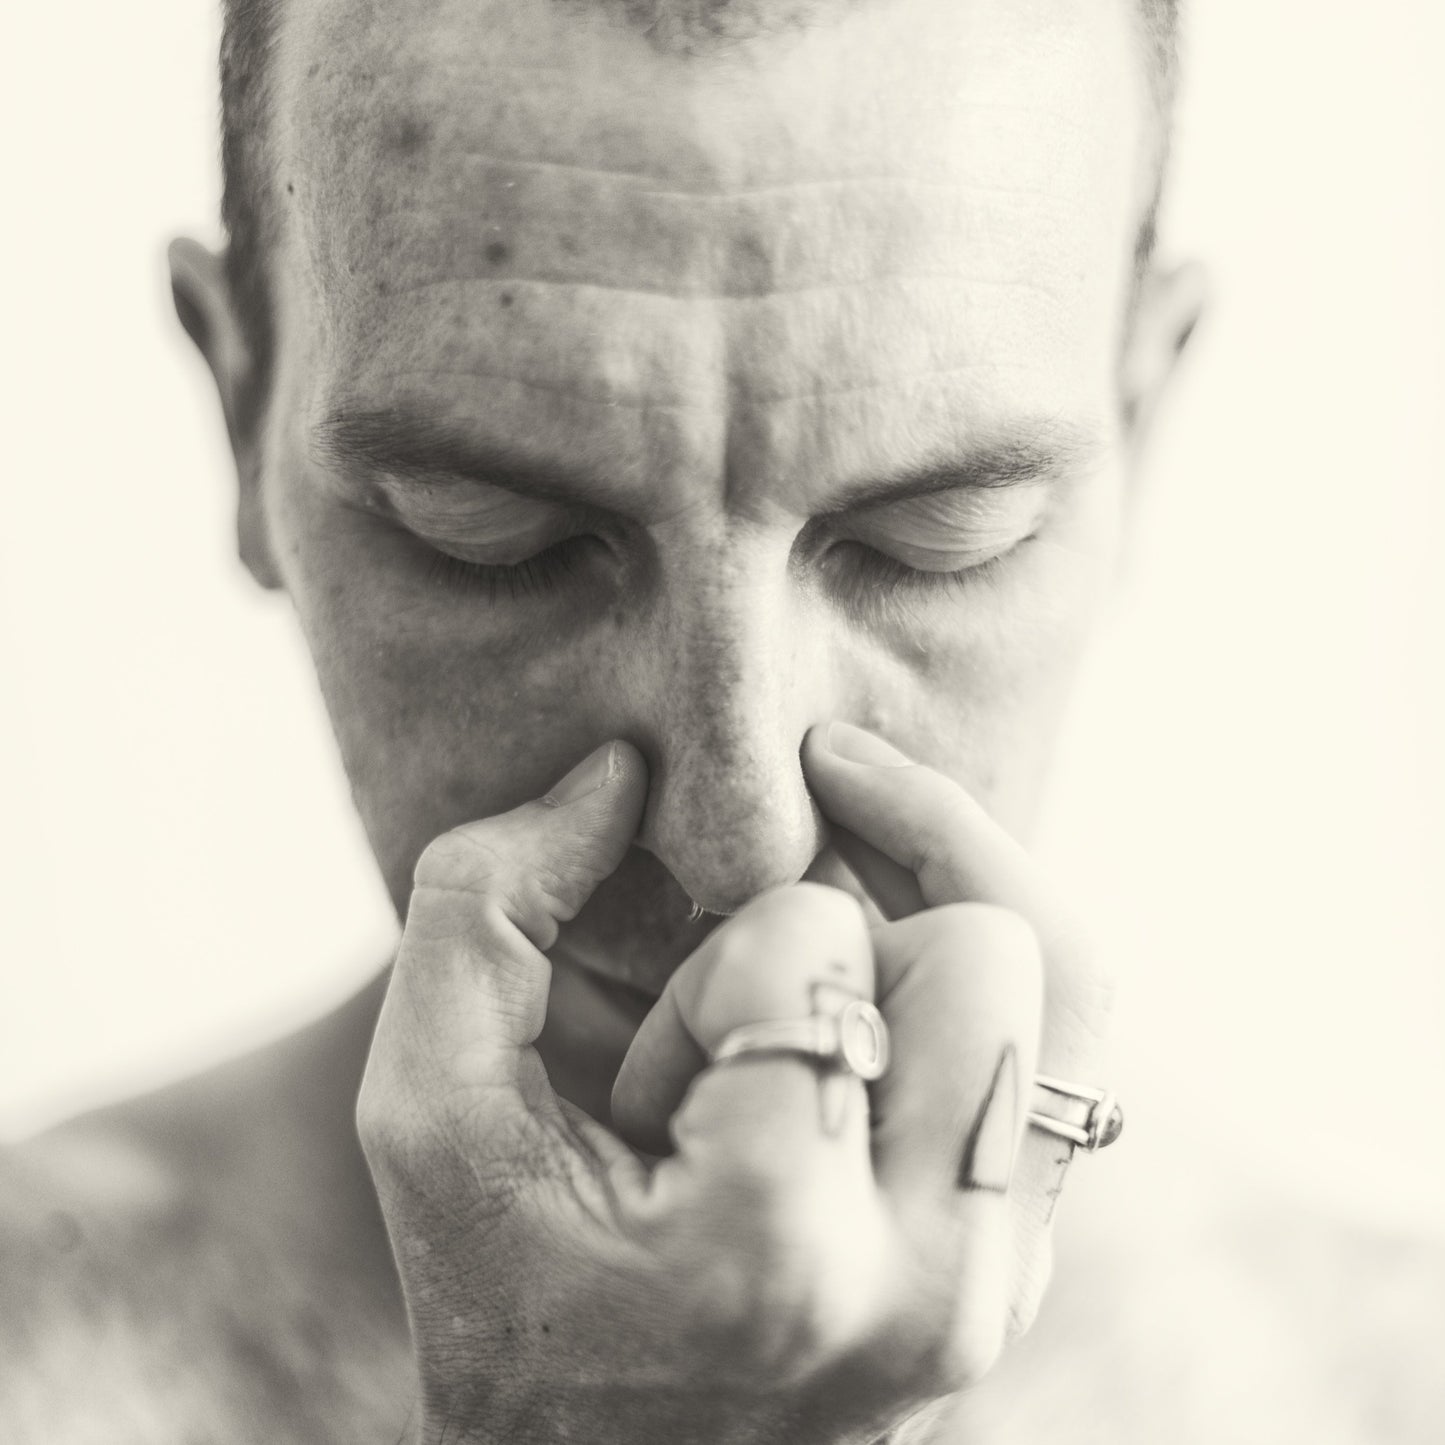 [Online] PRANAYAMA AND MEDITATION by Will Duprey (45 min) at 6.30pm on 2 June 2020 -completed